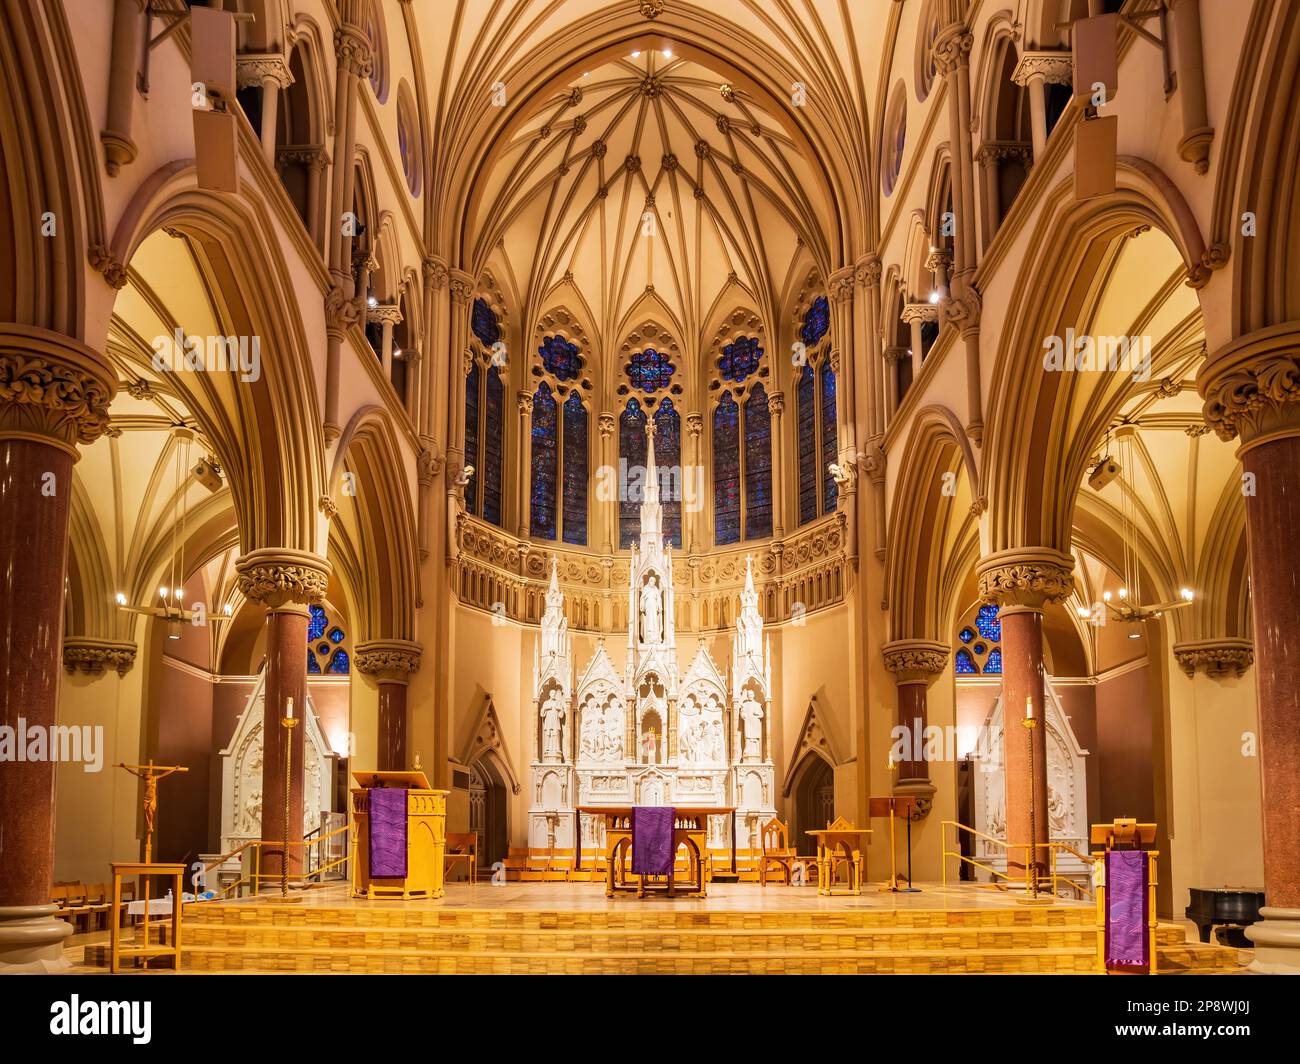 Interior view of the St. Francis Xavier College Church at Missouri Stock Photo